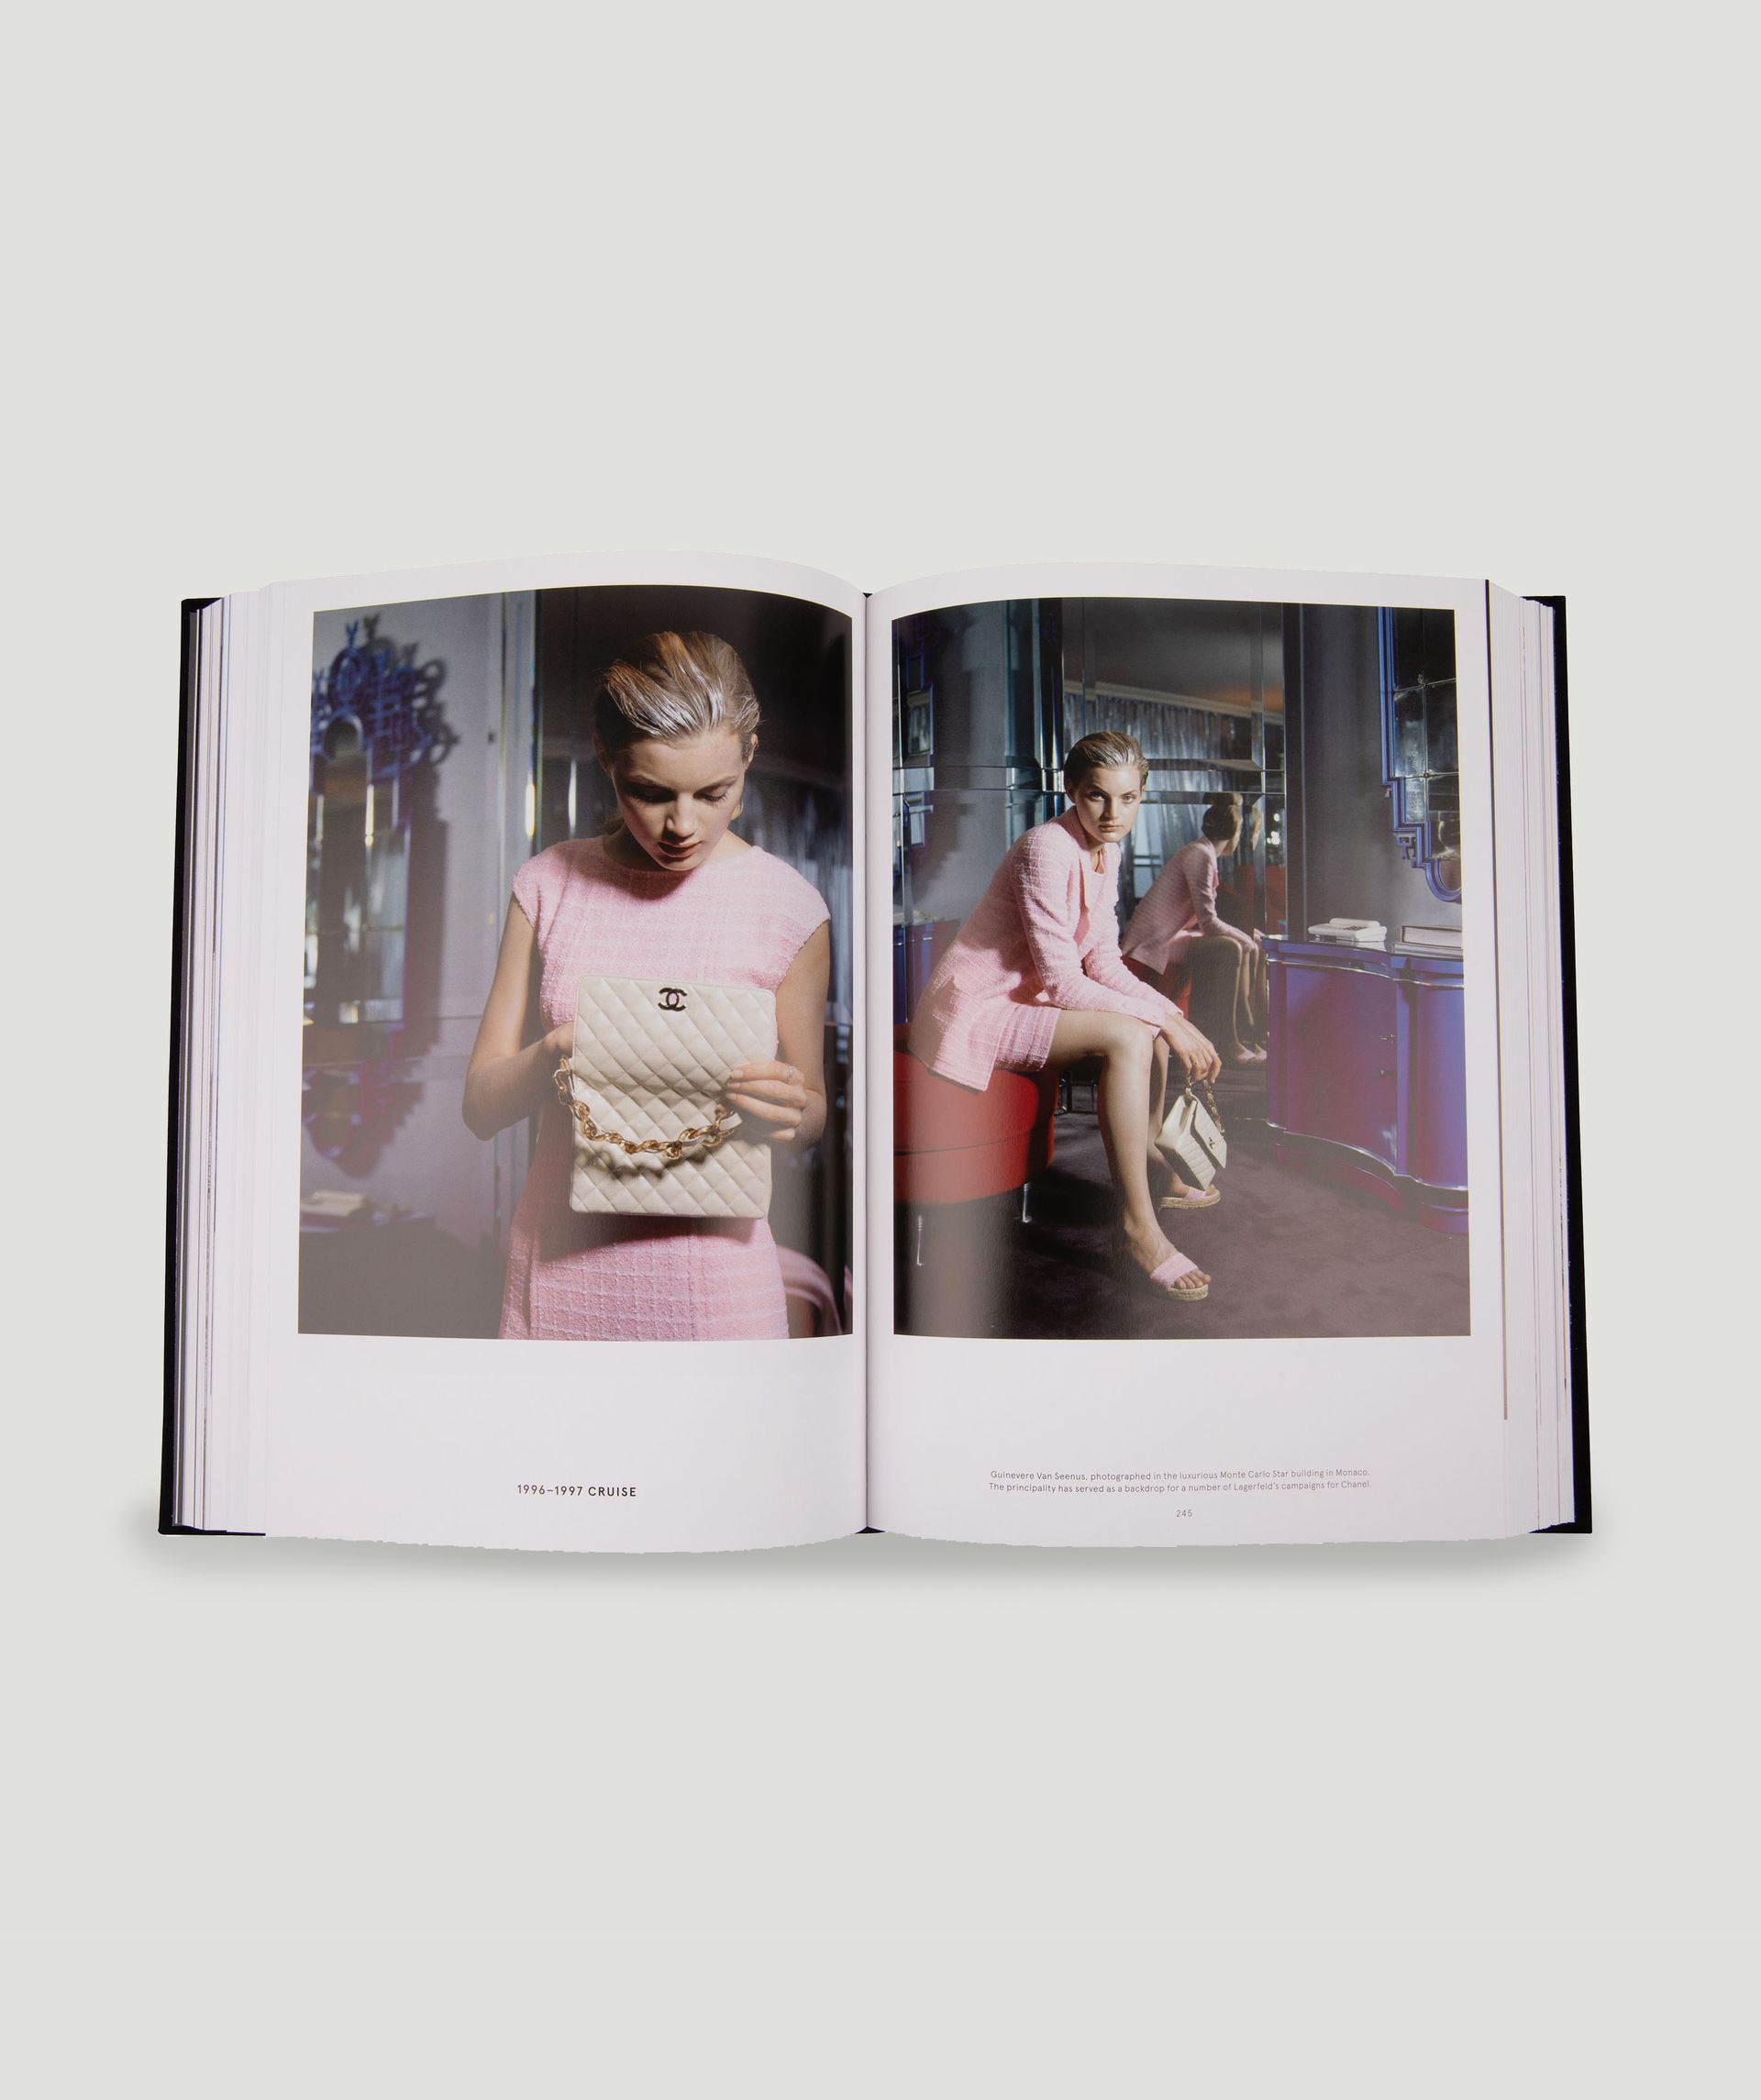 CHANEL The Karl Lagerfeld campaigns coffee table book